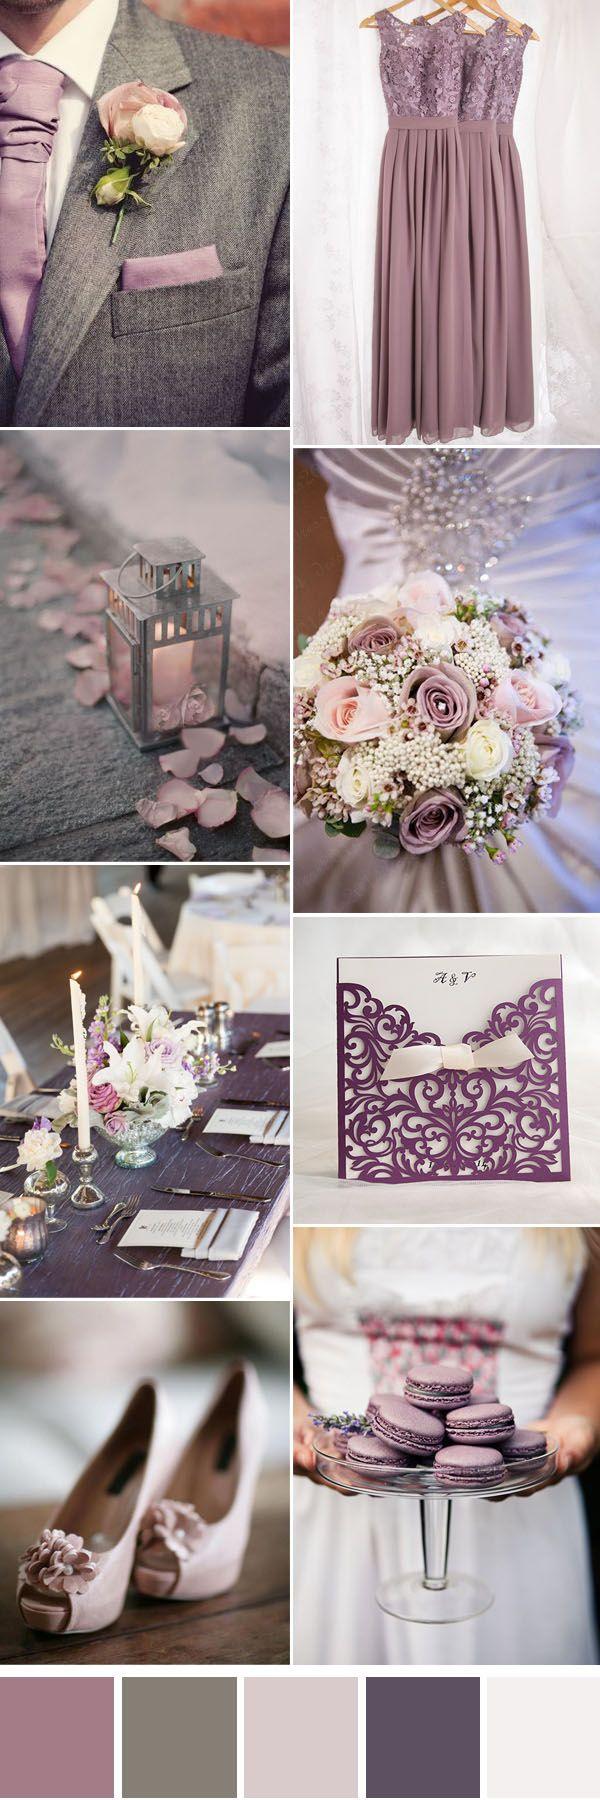 Wedding - Six Gorgeous Neutral Wedding Color Combos To Inspire You